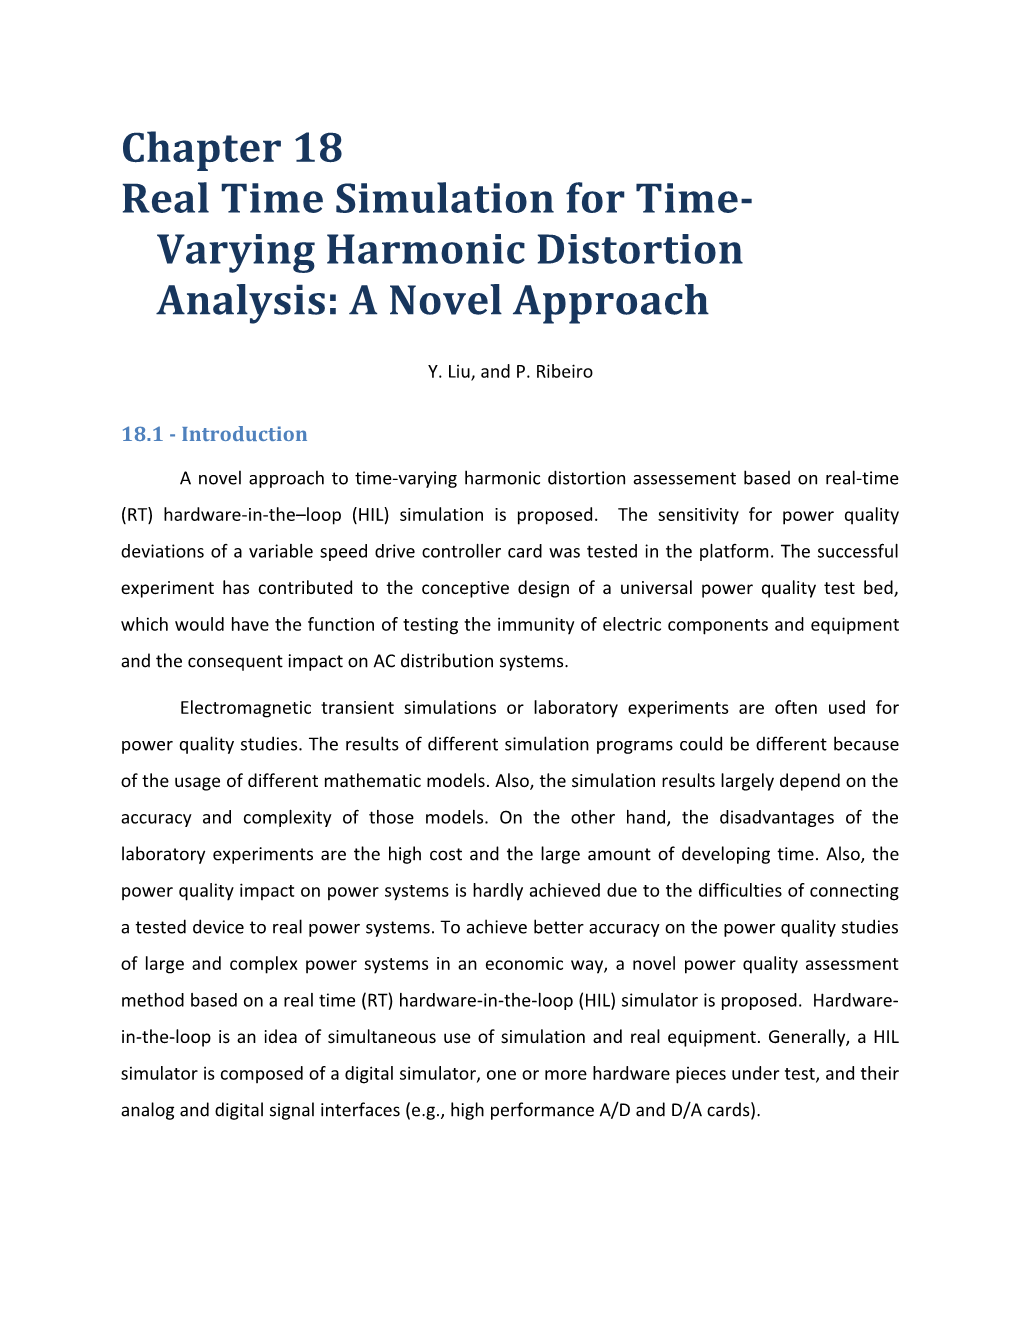 Realtime Simulation for Time-Varying Harmonic Distortion Analysis: a Novelapproach